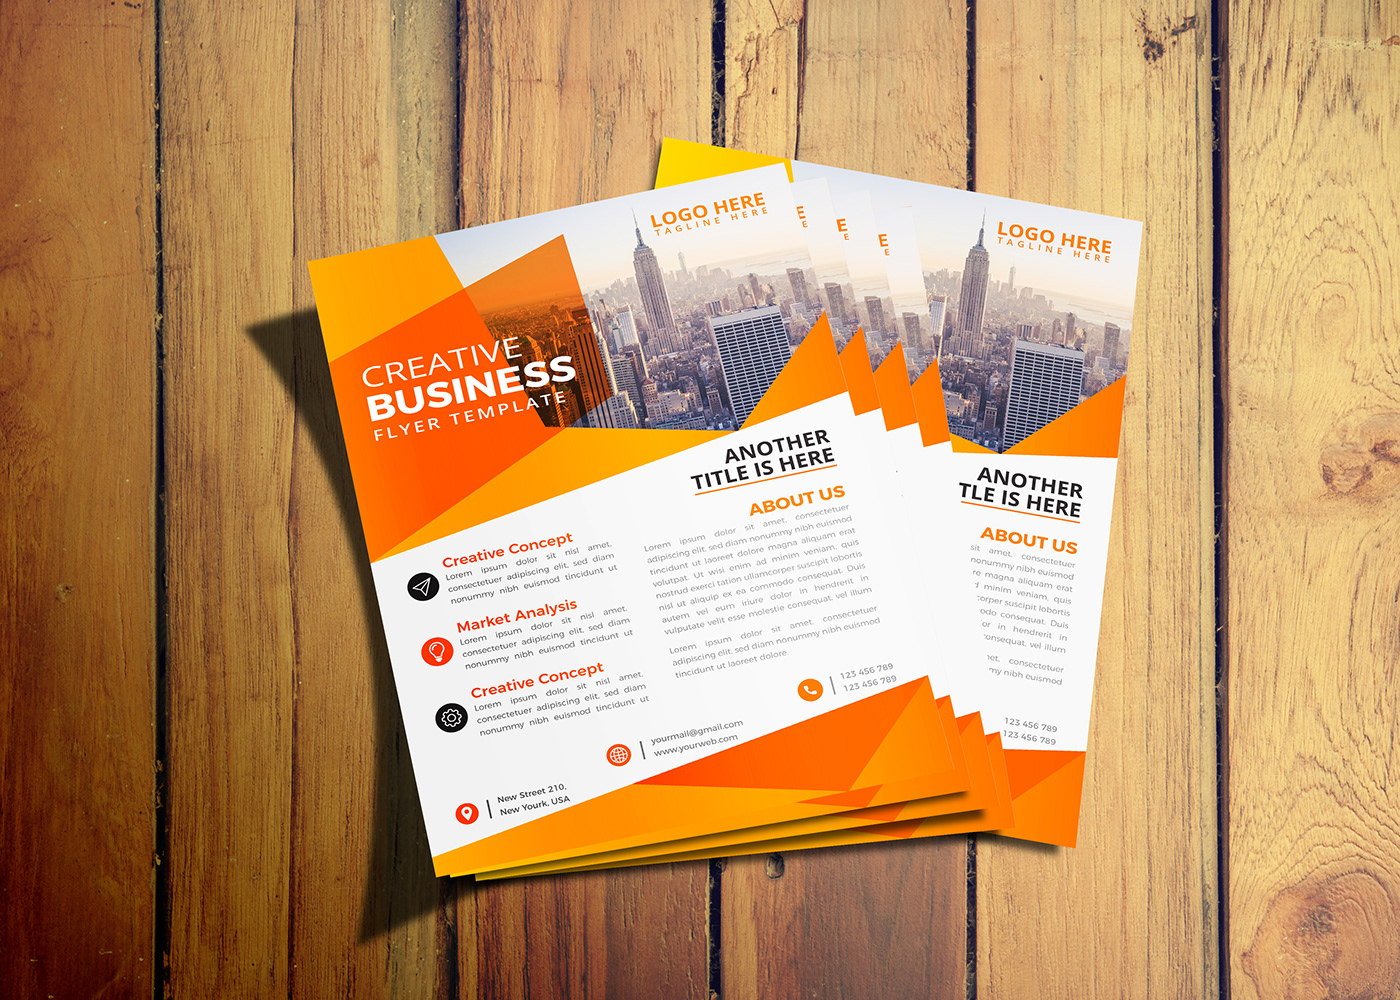 This is a Creative Business flyer template to announce special events and for direct marketing